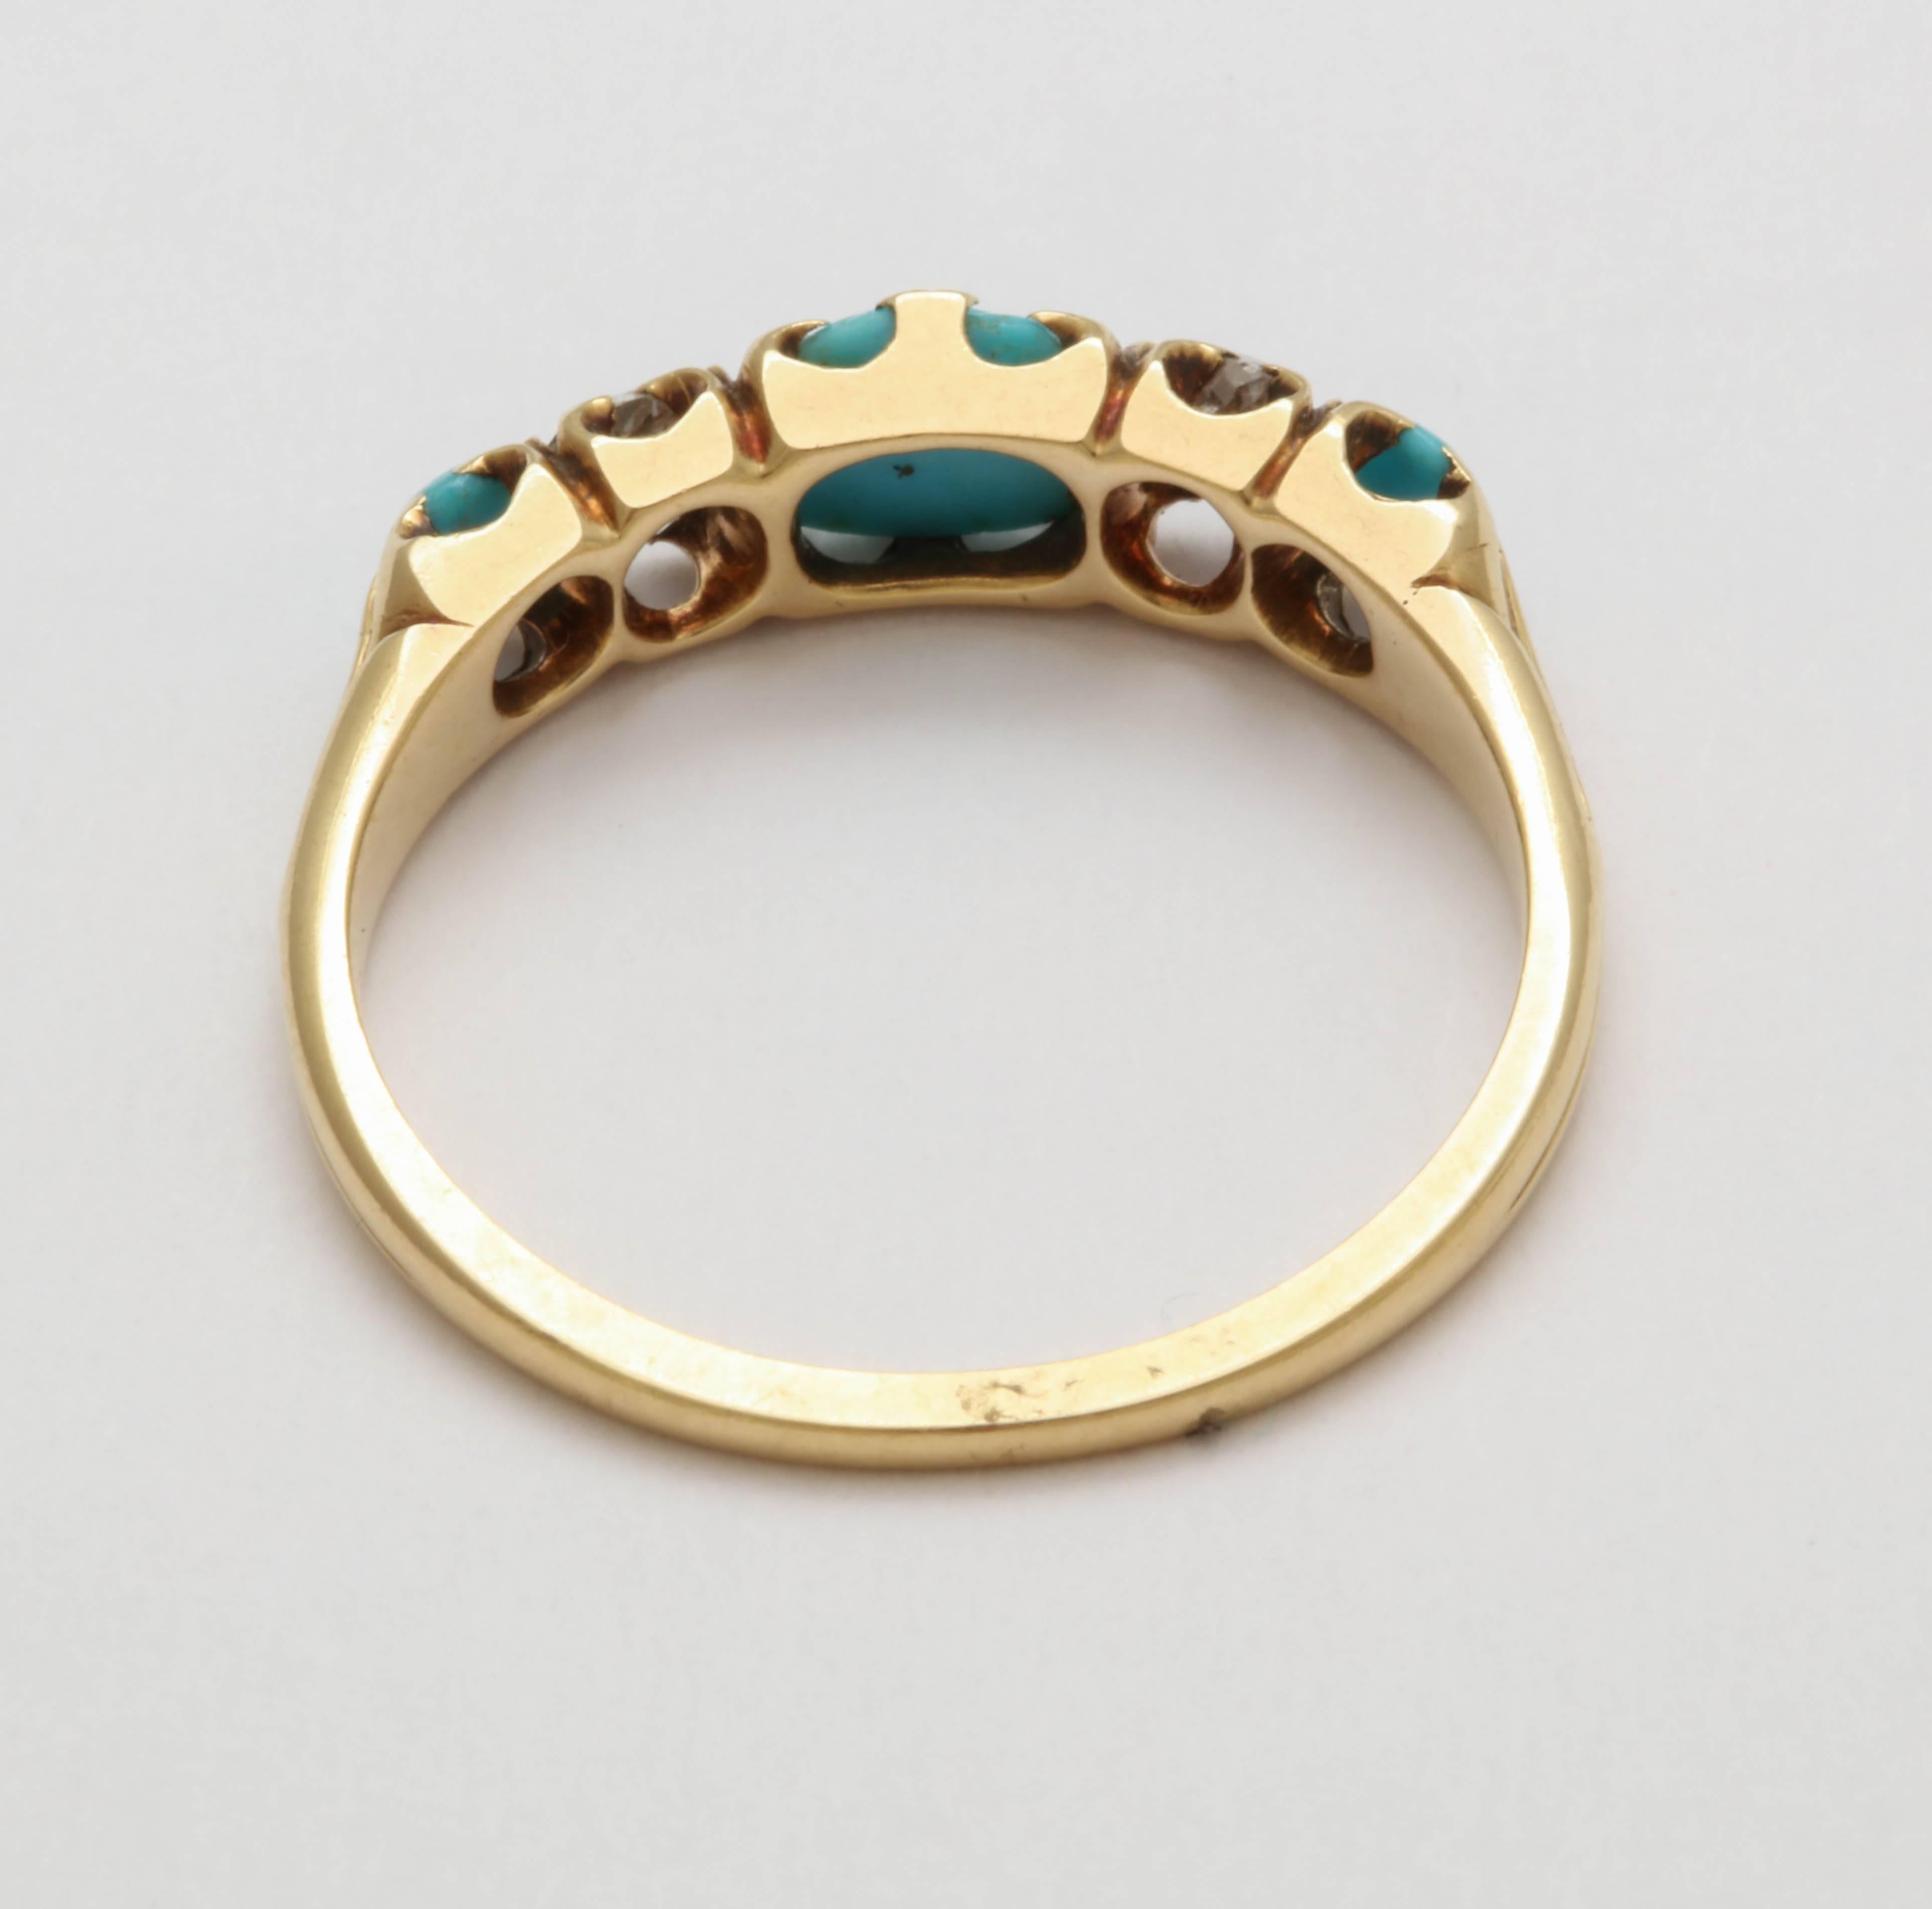 Women's or Men's Turquoise Carved Fede and Diamond Ring